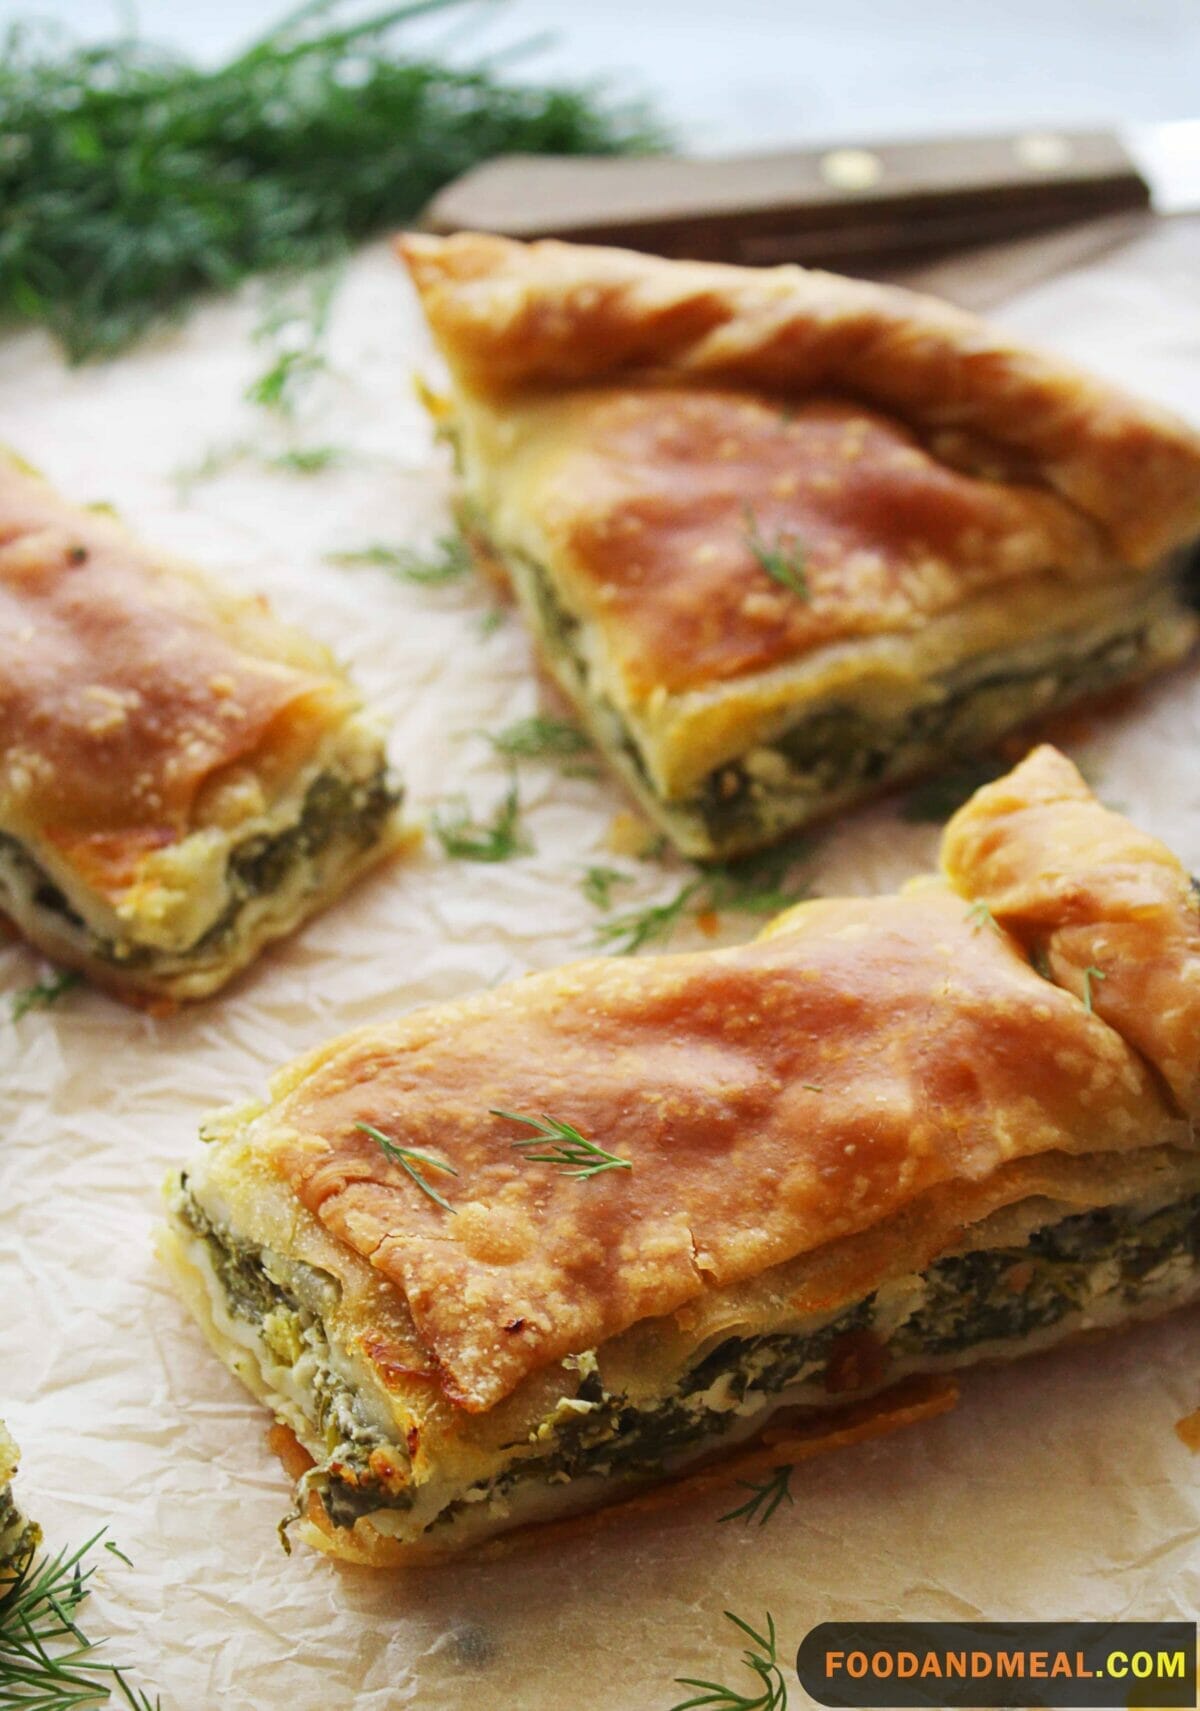 Spinach Pies